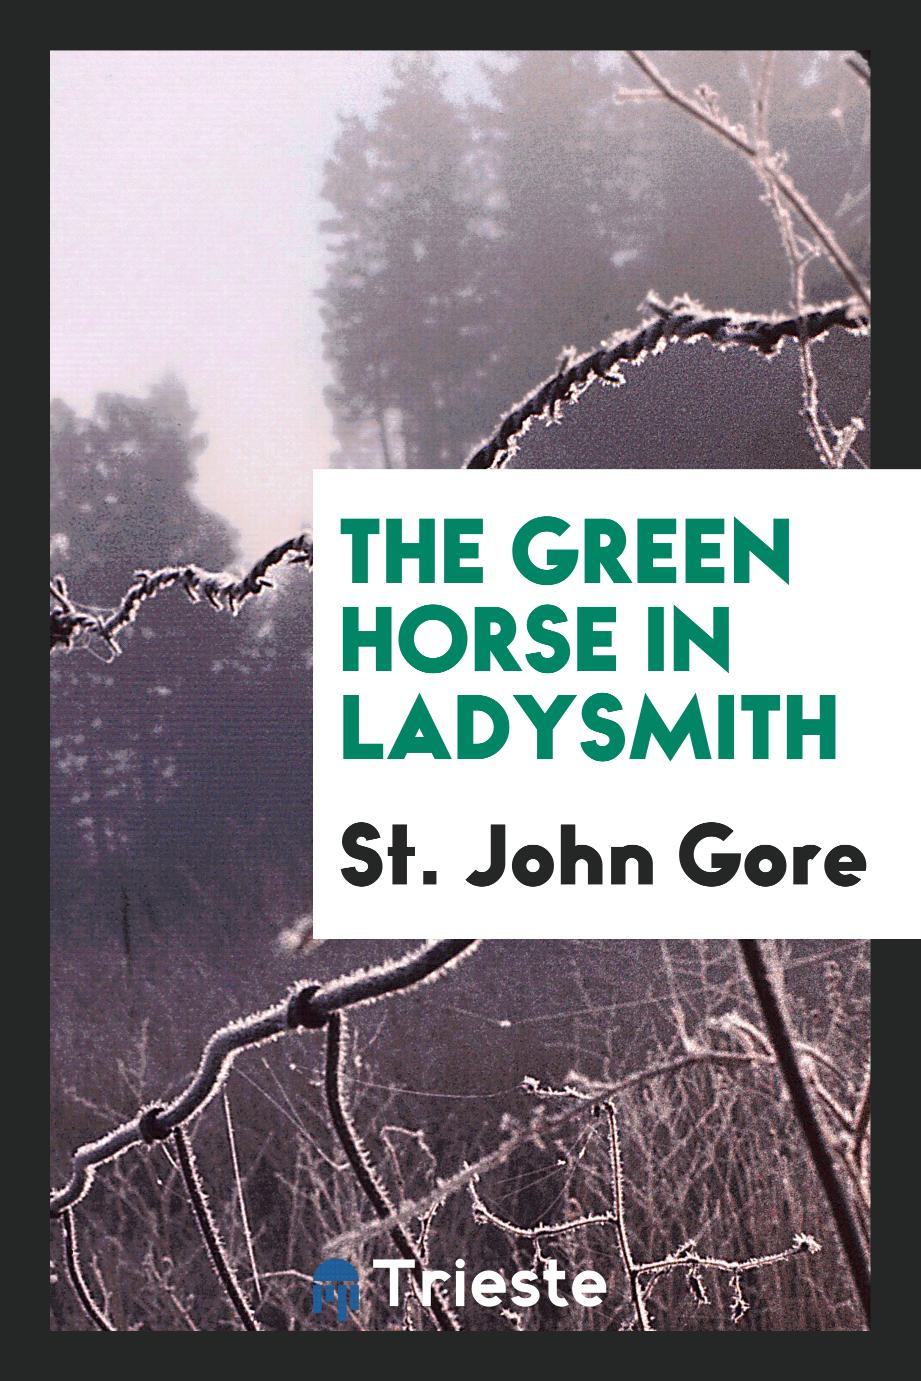 The Green Horse in Ladysmith